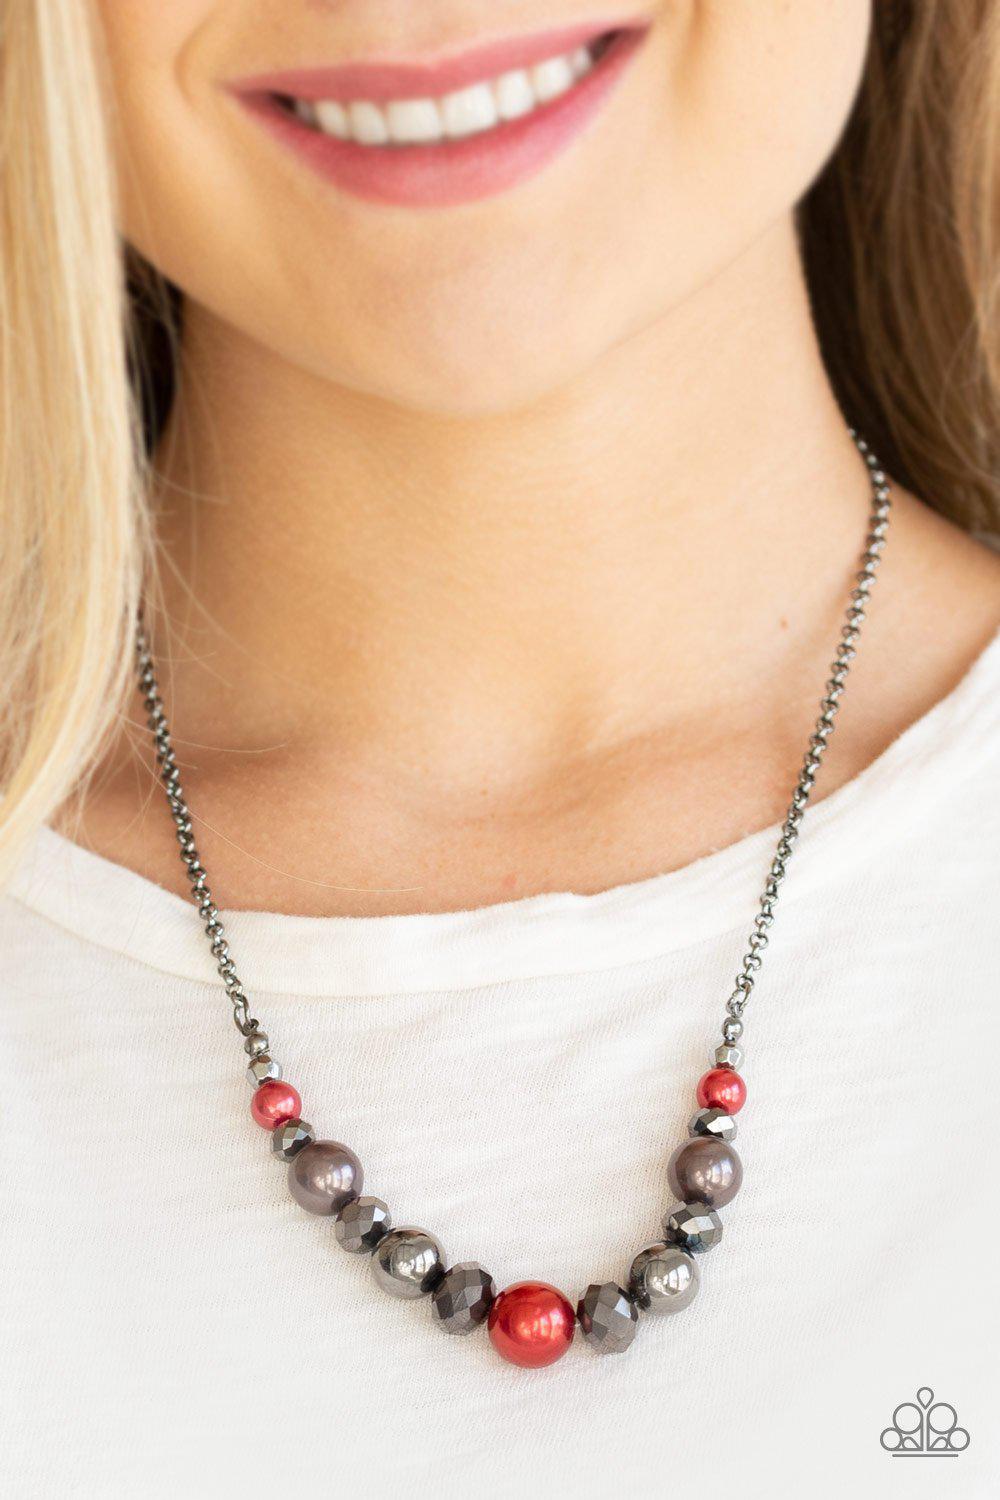 The Big Leaguer Multi - Red, Hematite and Gunmetal Pearl Necklace - Paparazzi Accessories - model -CarasShop.com - $5 Jewelry by Cara Jewels